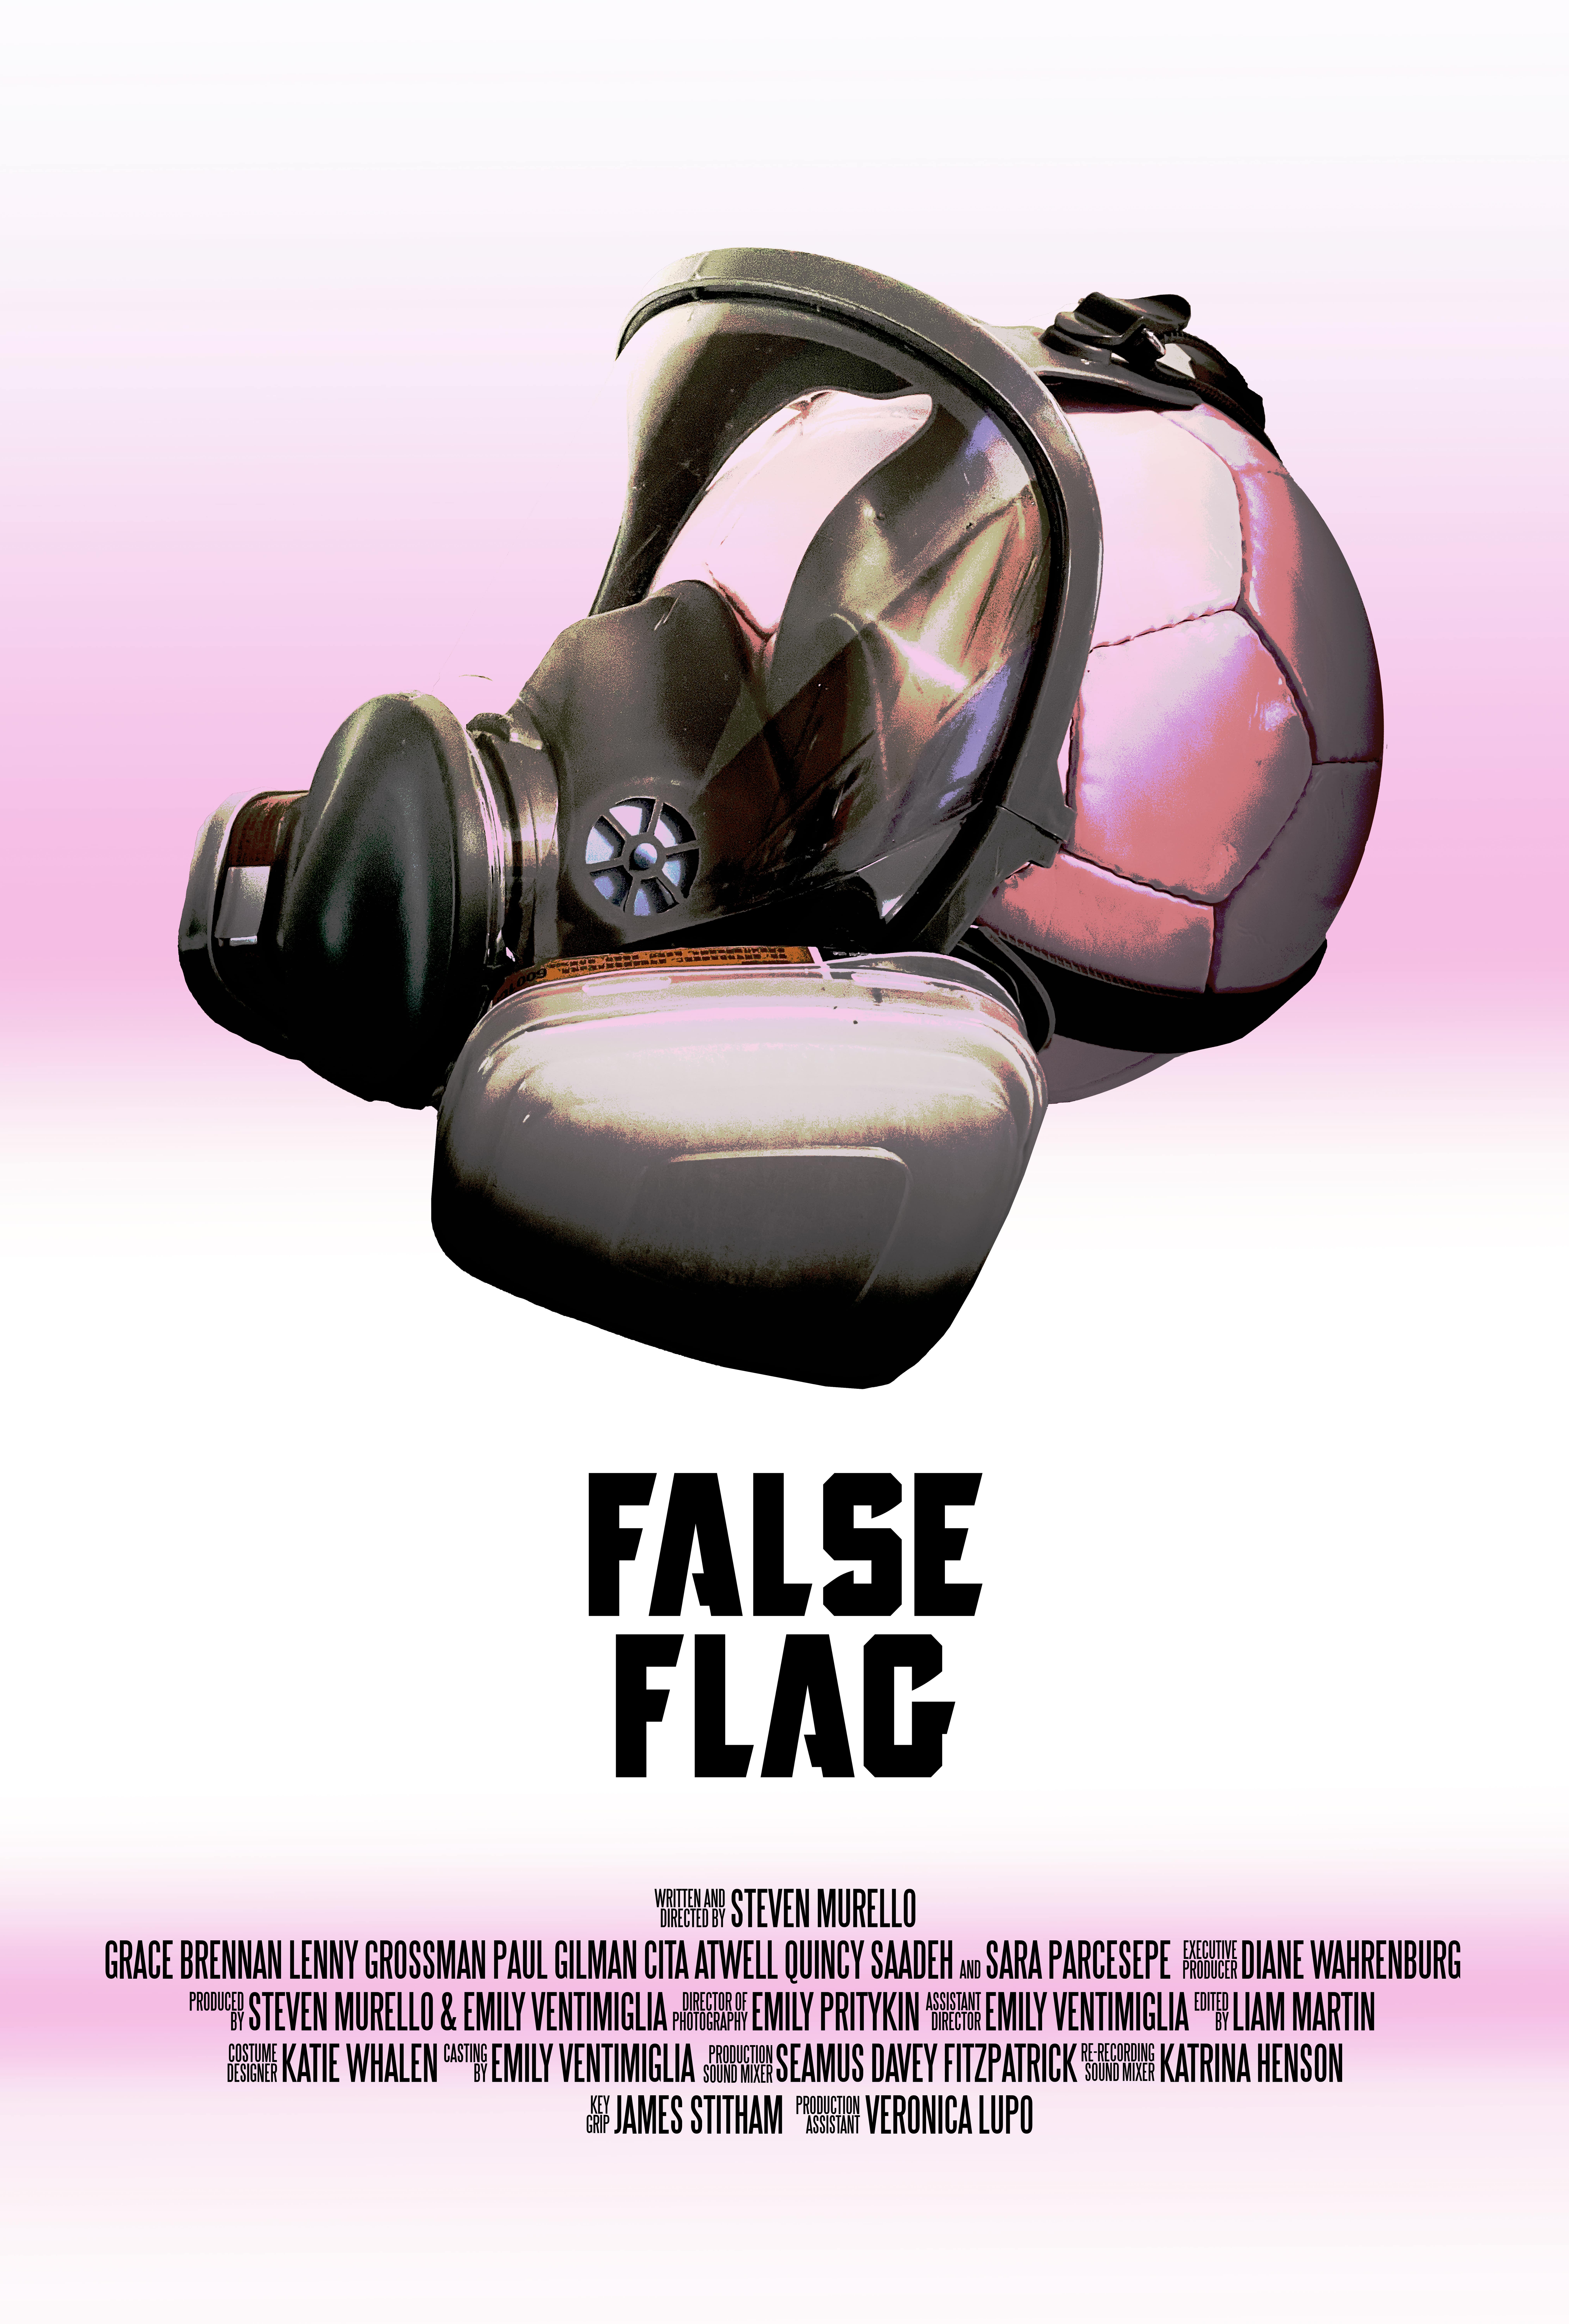 Poster for Steven's film False Flag features a gas mask over a pink and white hue.